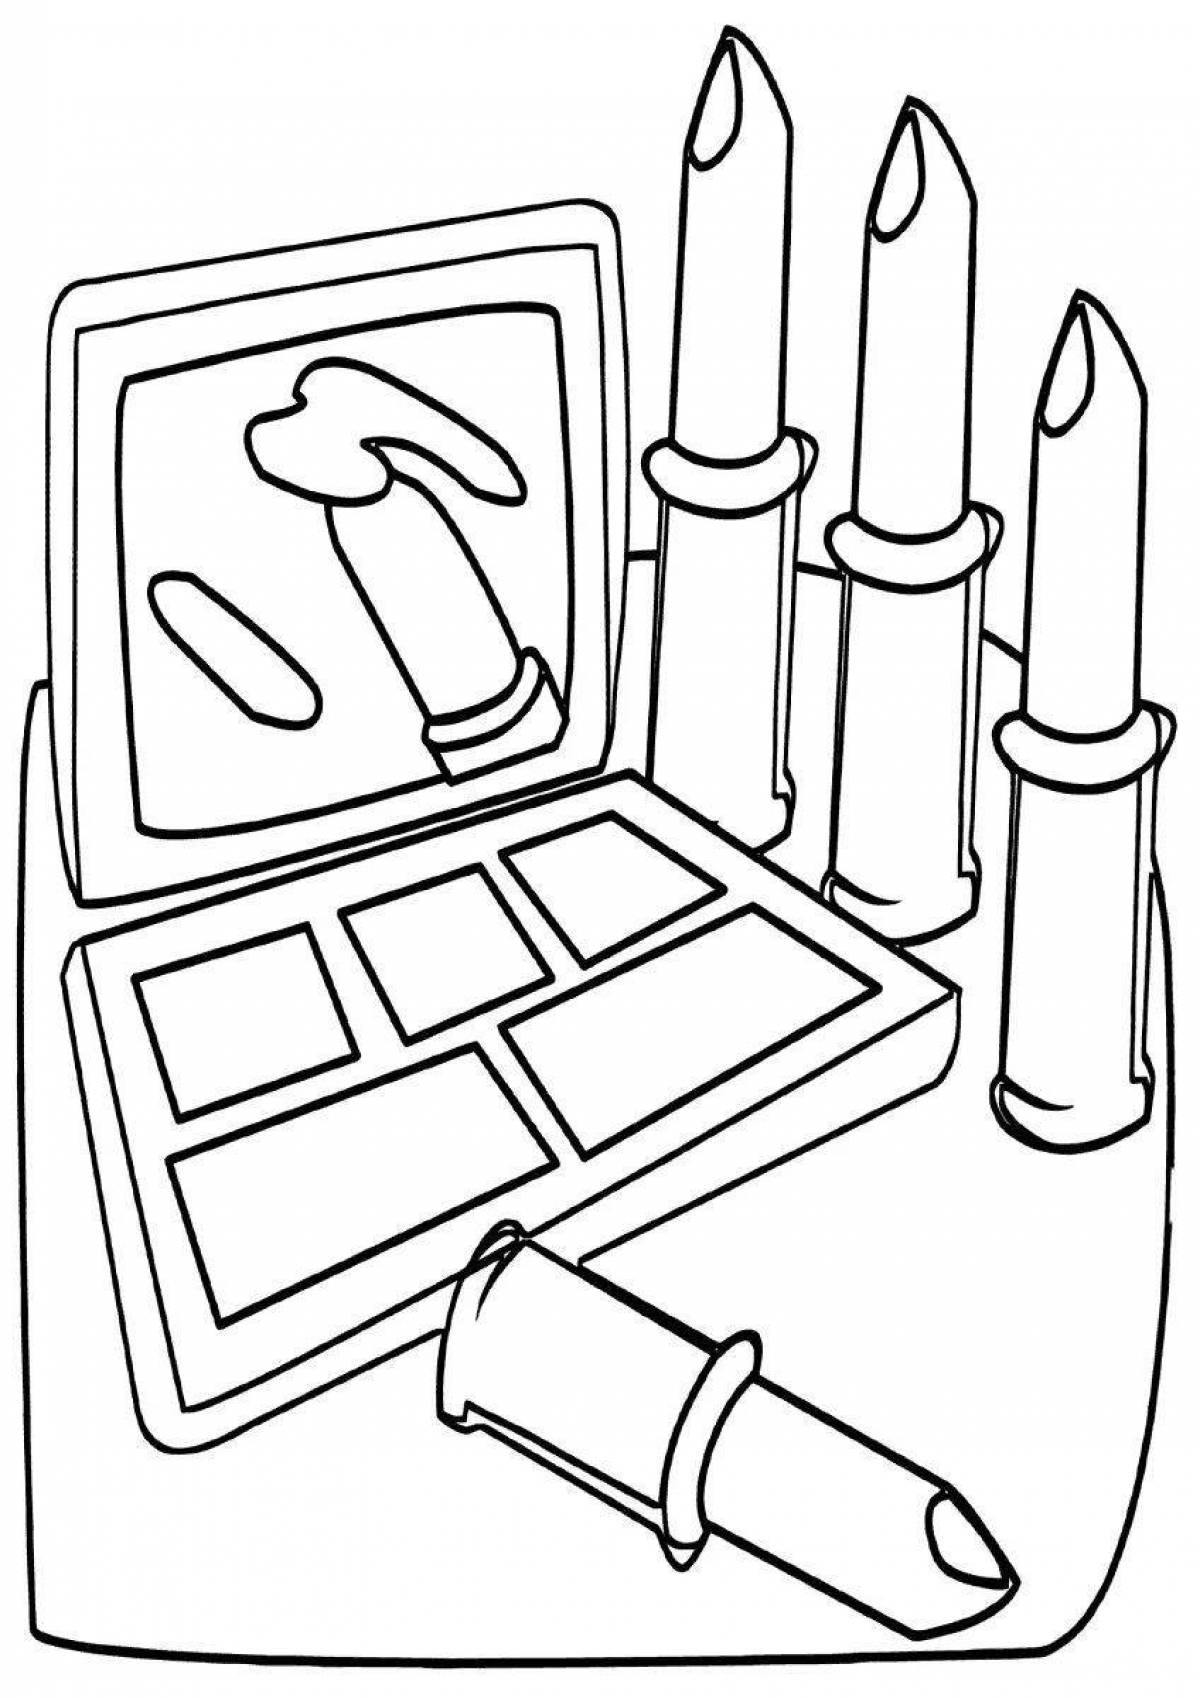 Playful youth lipstick coloring page